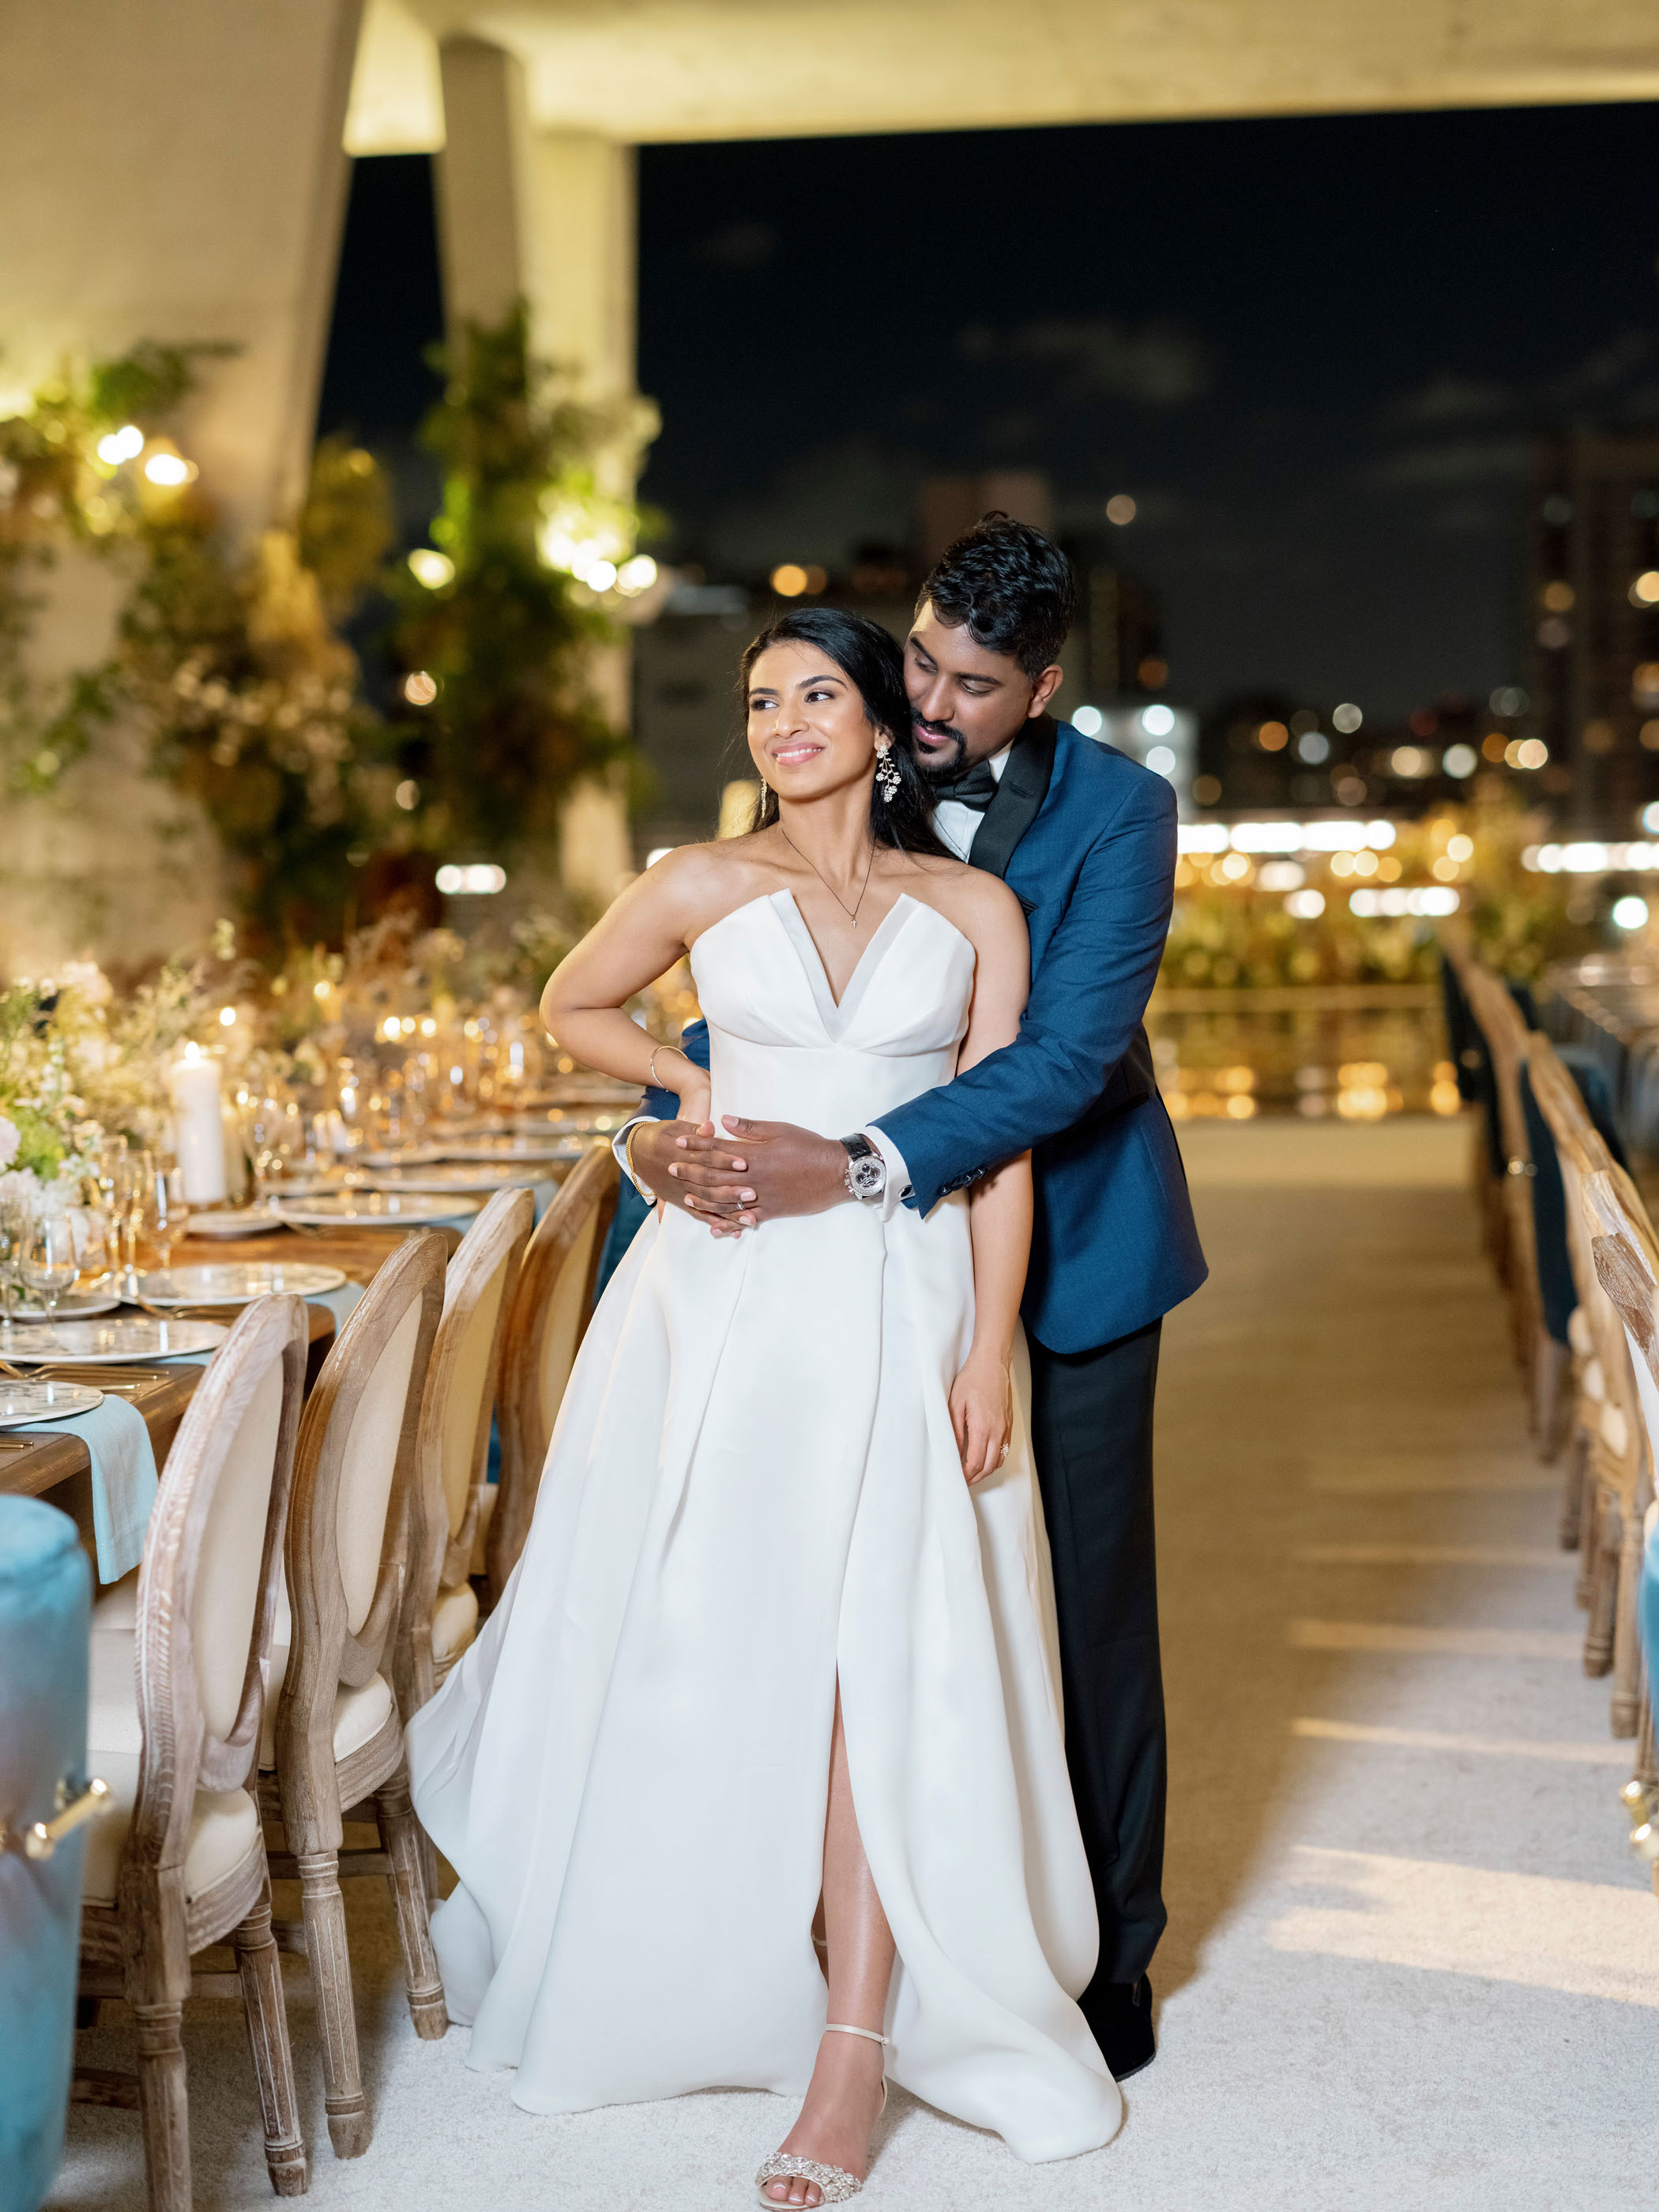 A Miami Parking Garage Was Transformed Into a Jaw Dropping Wedding Venue